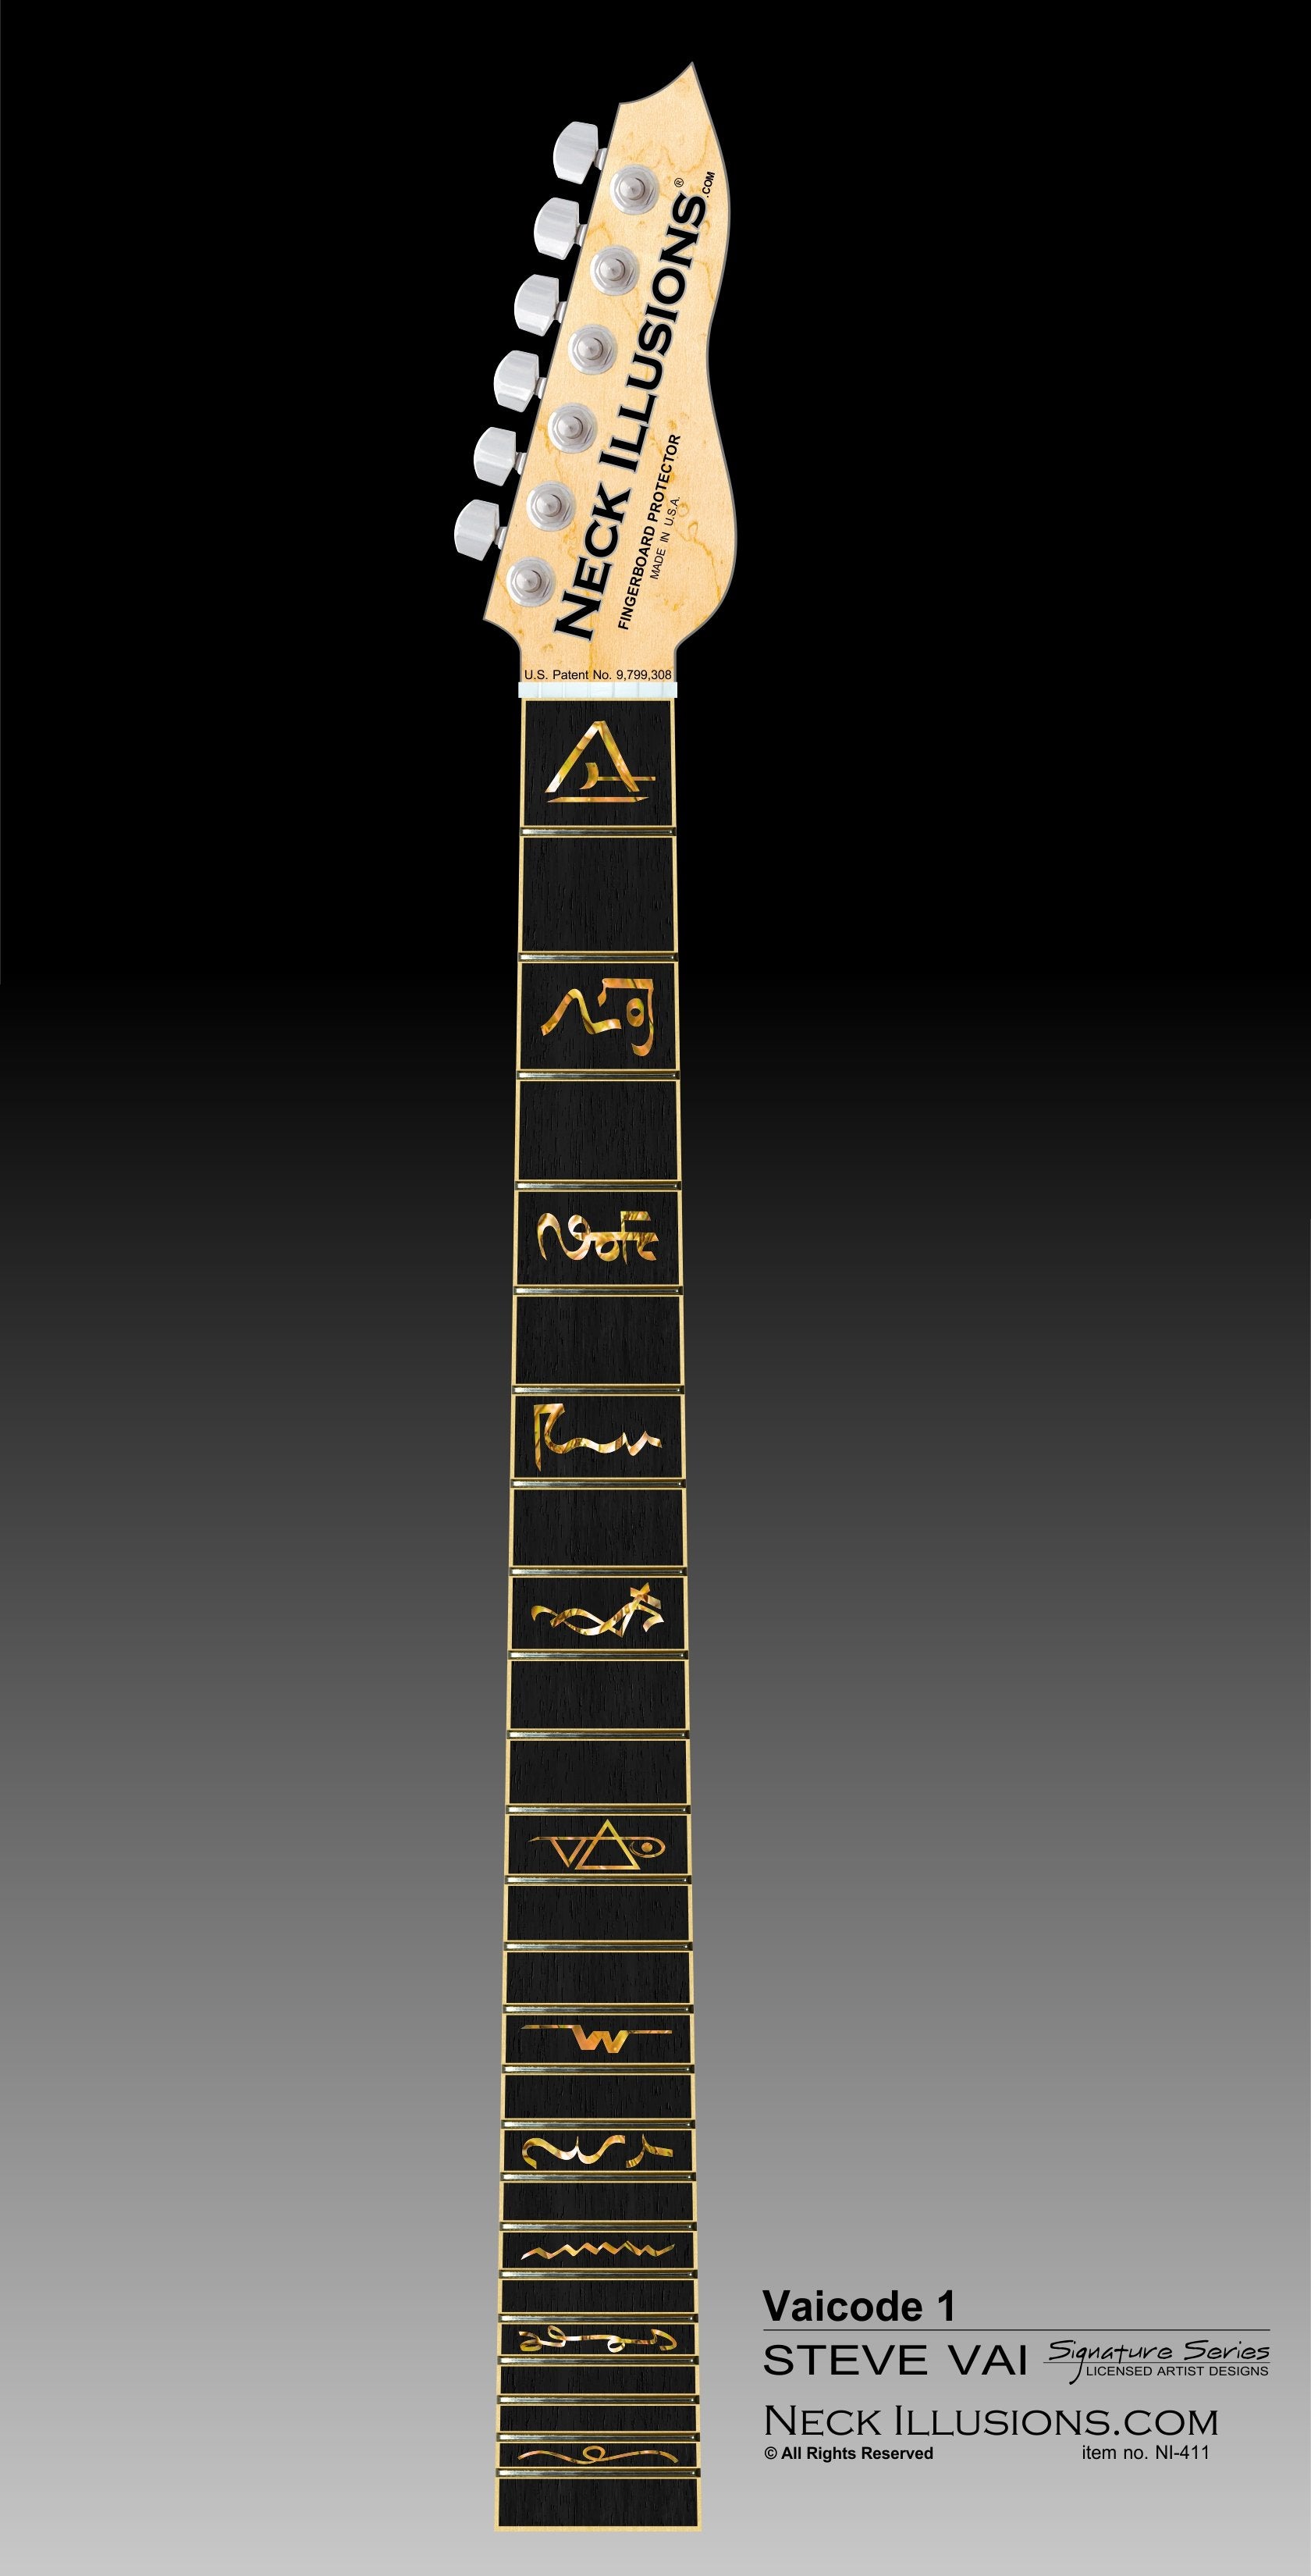 close up image of a guitar neck against a black to grey gradient background. there is a fret protector on the guitar. It is black with multi-color symbols on nearly every other fret. One fret has the steve vai logo on it. The steve vai logo makes the word "vai" with an upside down triangle, a right side up one, and a line going across the triangles with a curl at the end next to the triangle that is upright. 